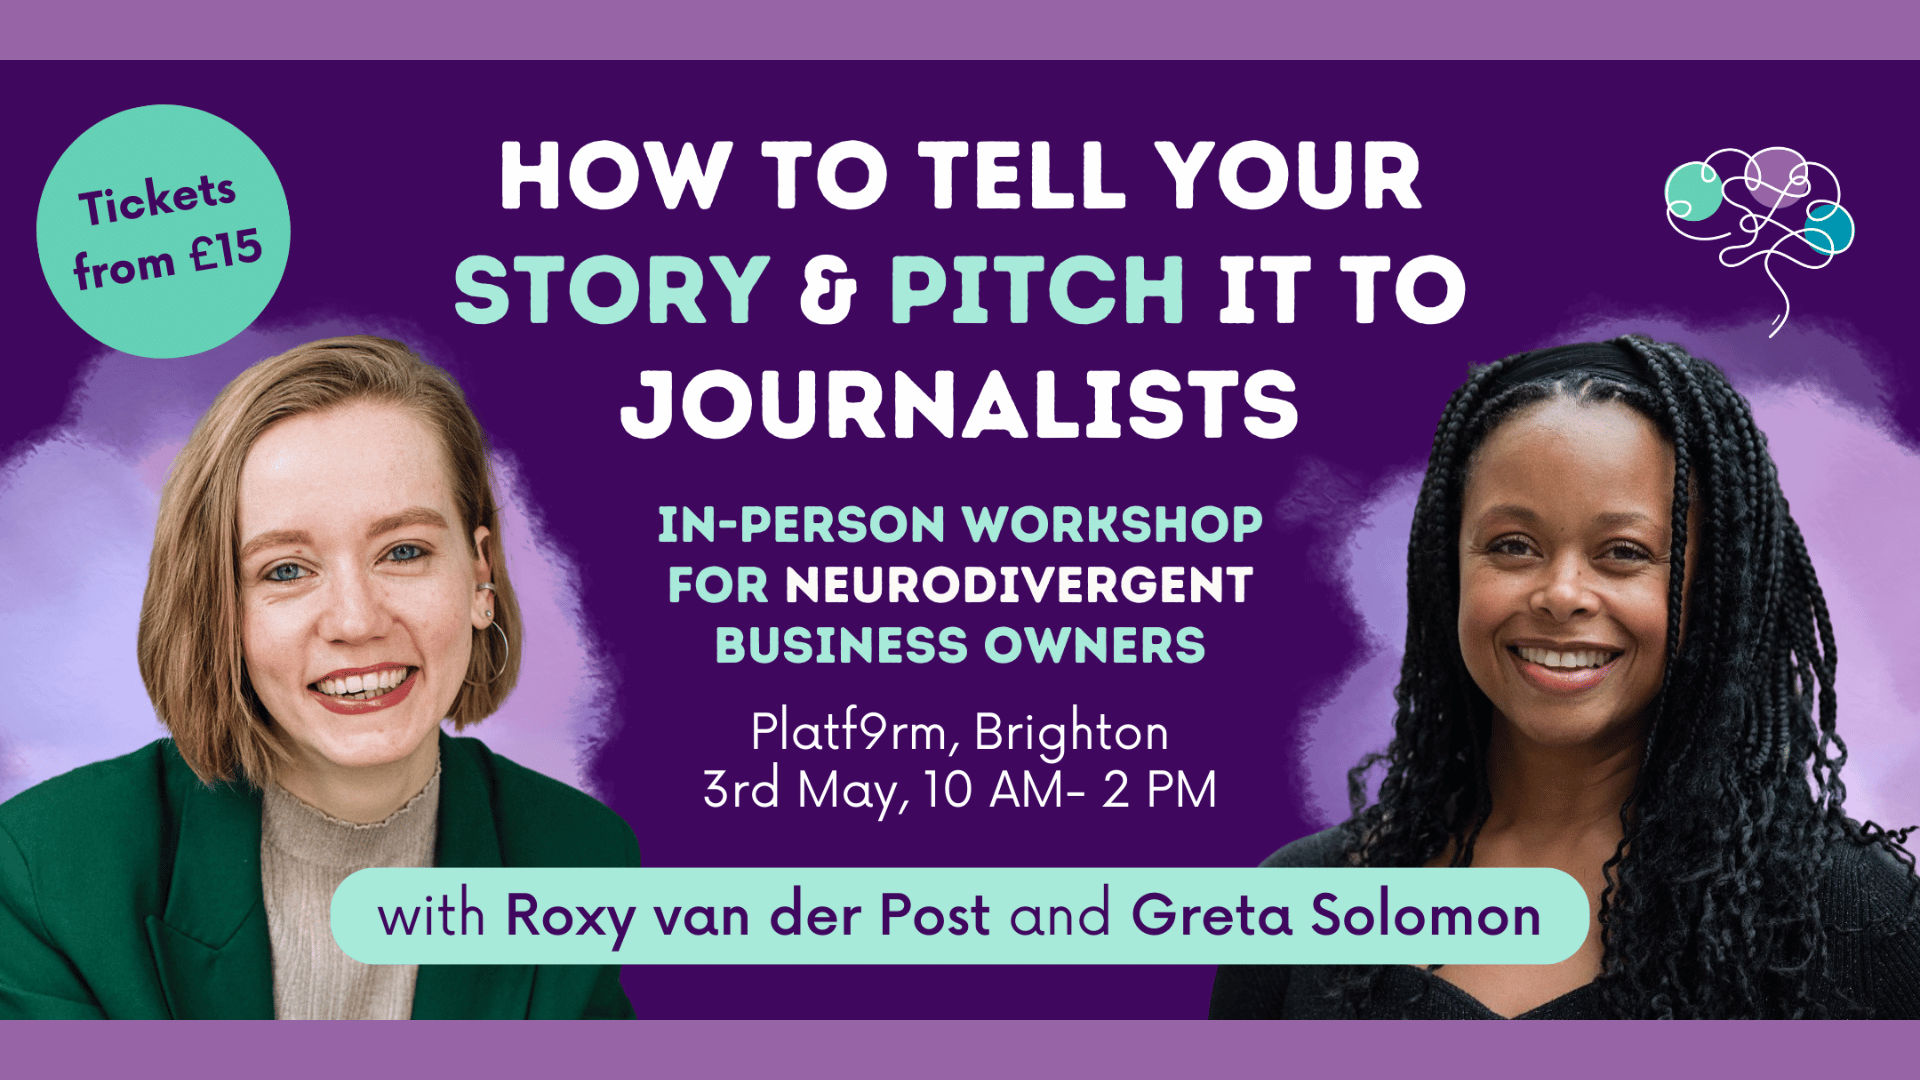 How To Tell Your Story & Pitch It To Journalists